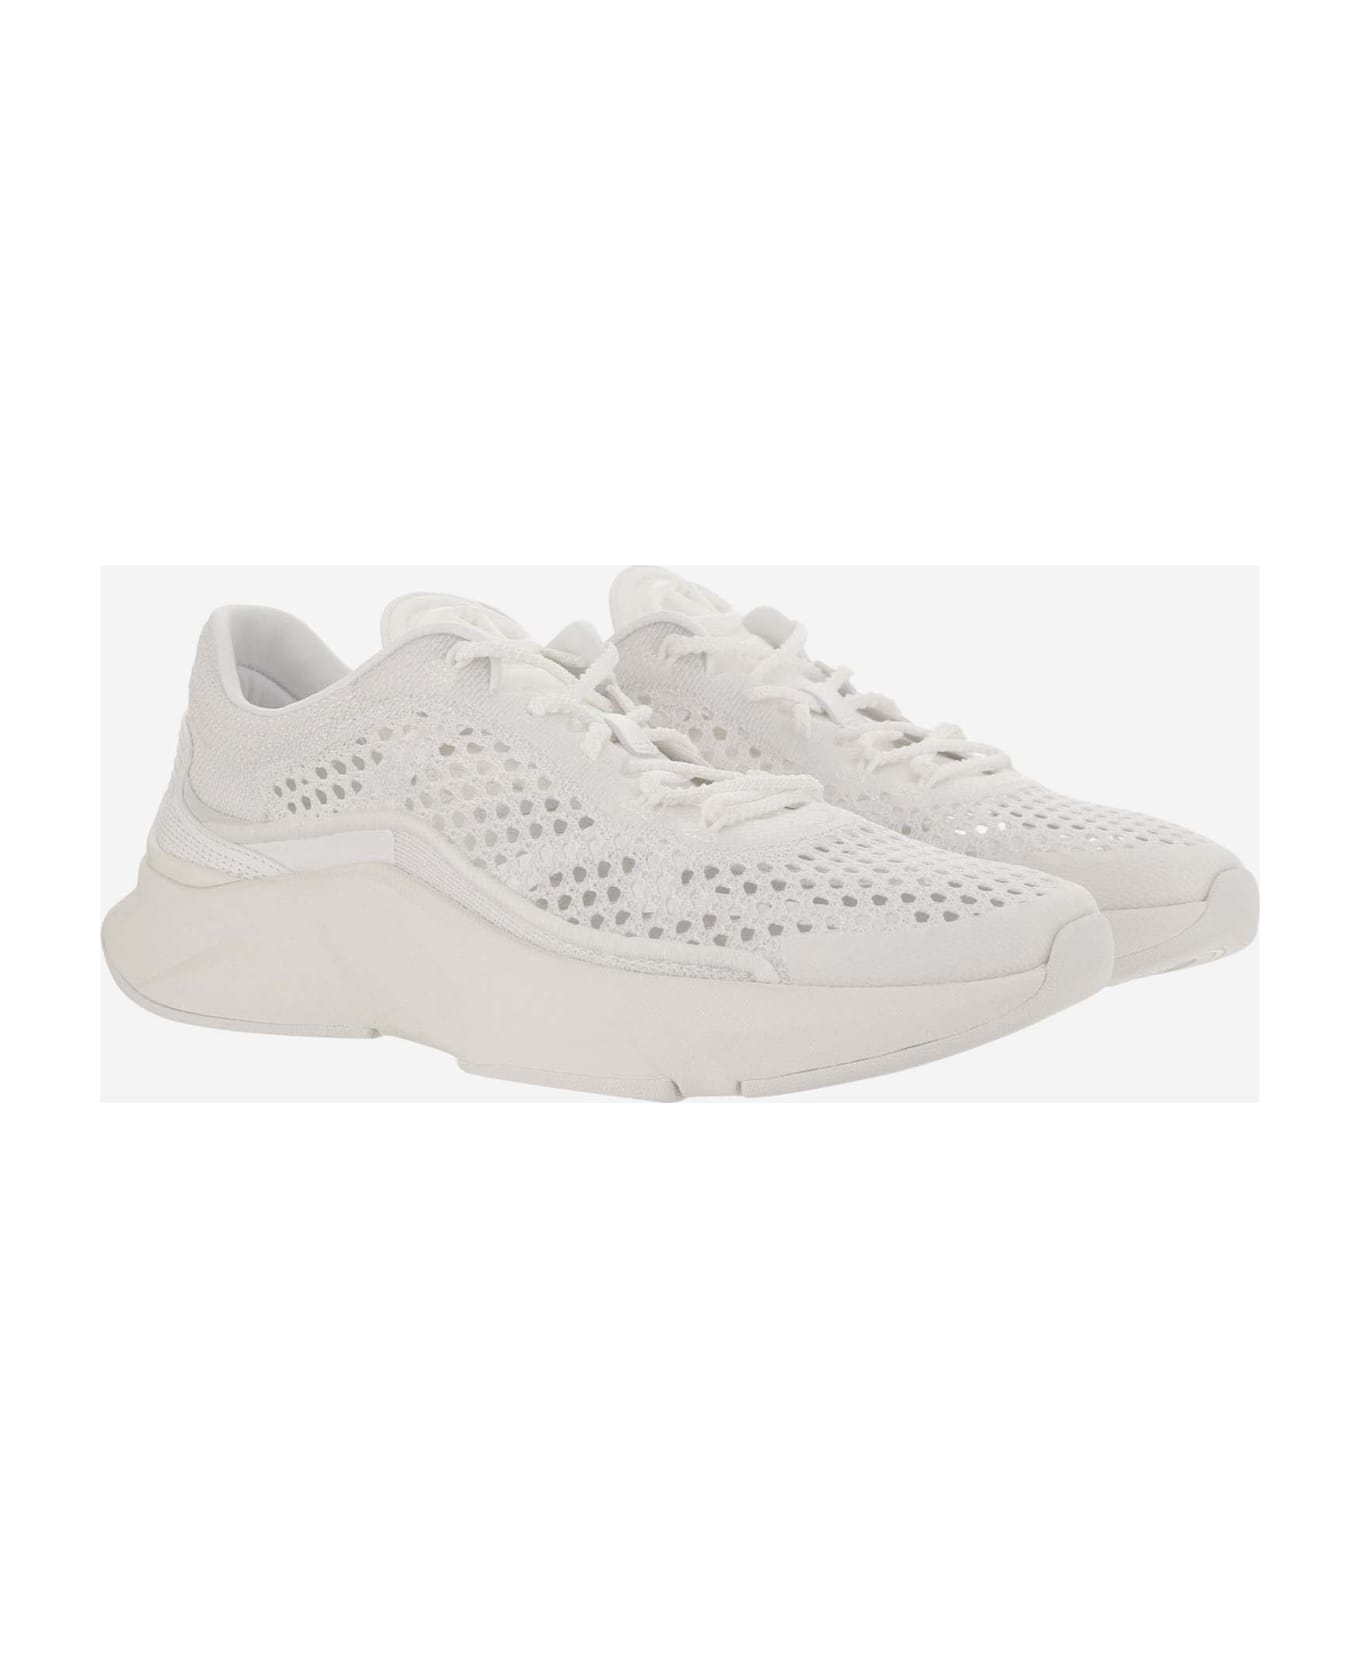 Valentino Garavani True Actress Sneakers In Mesh And Leather - White スニーカー